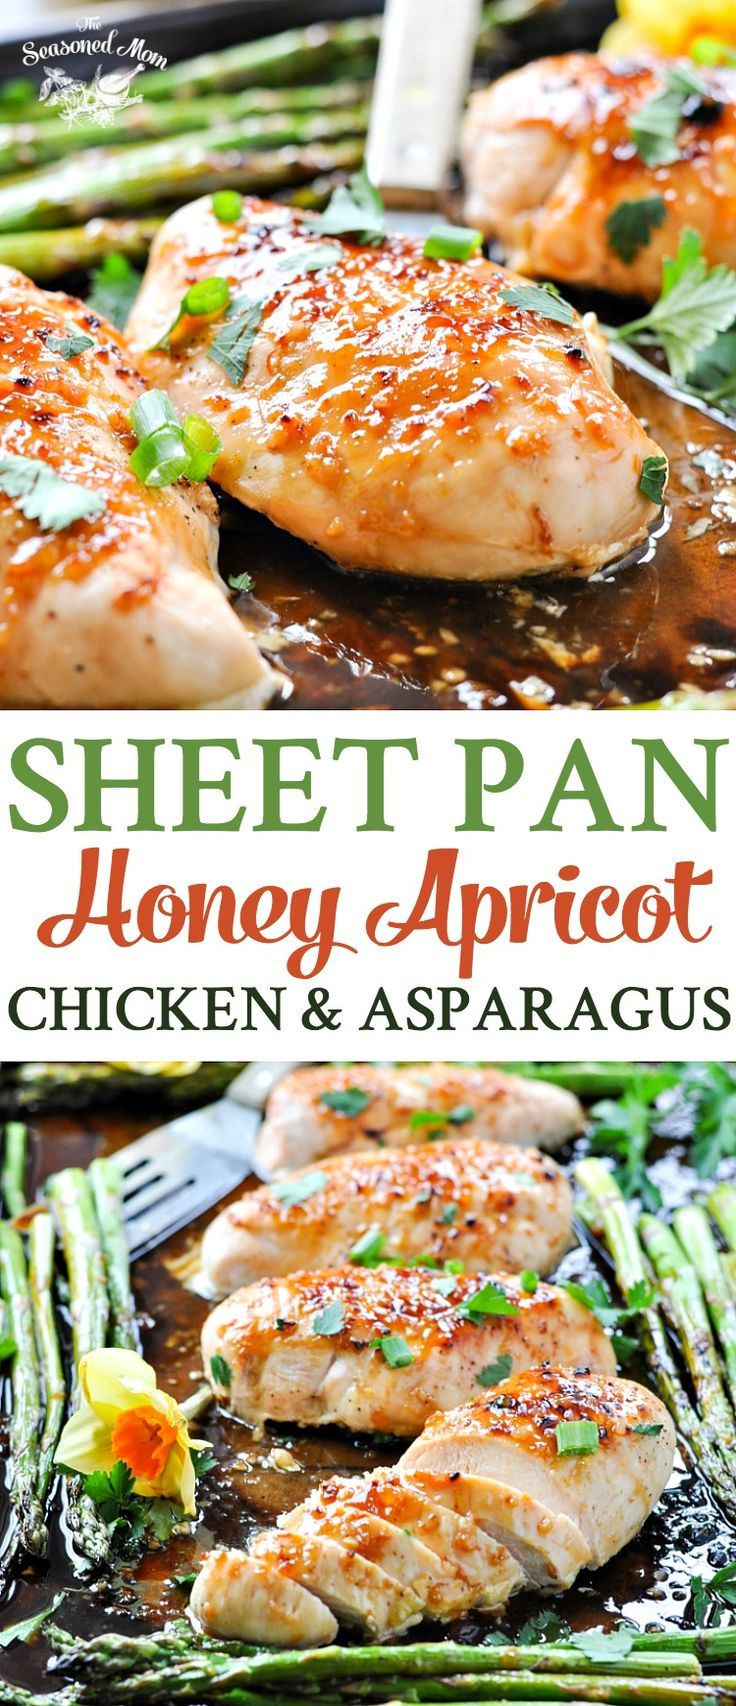 Healthy Chicken Breast Dinner
 100 Healthy asparagus recipes on Pinterest